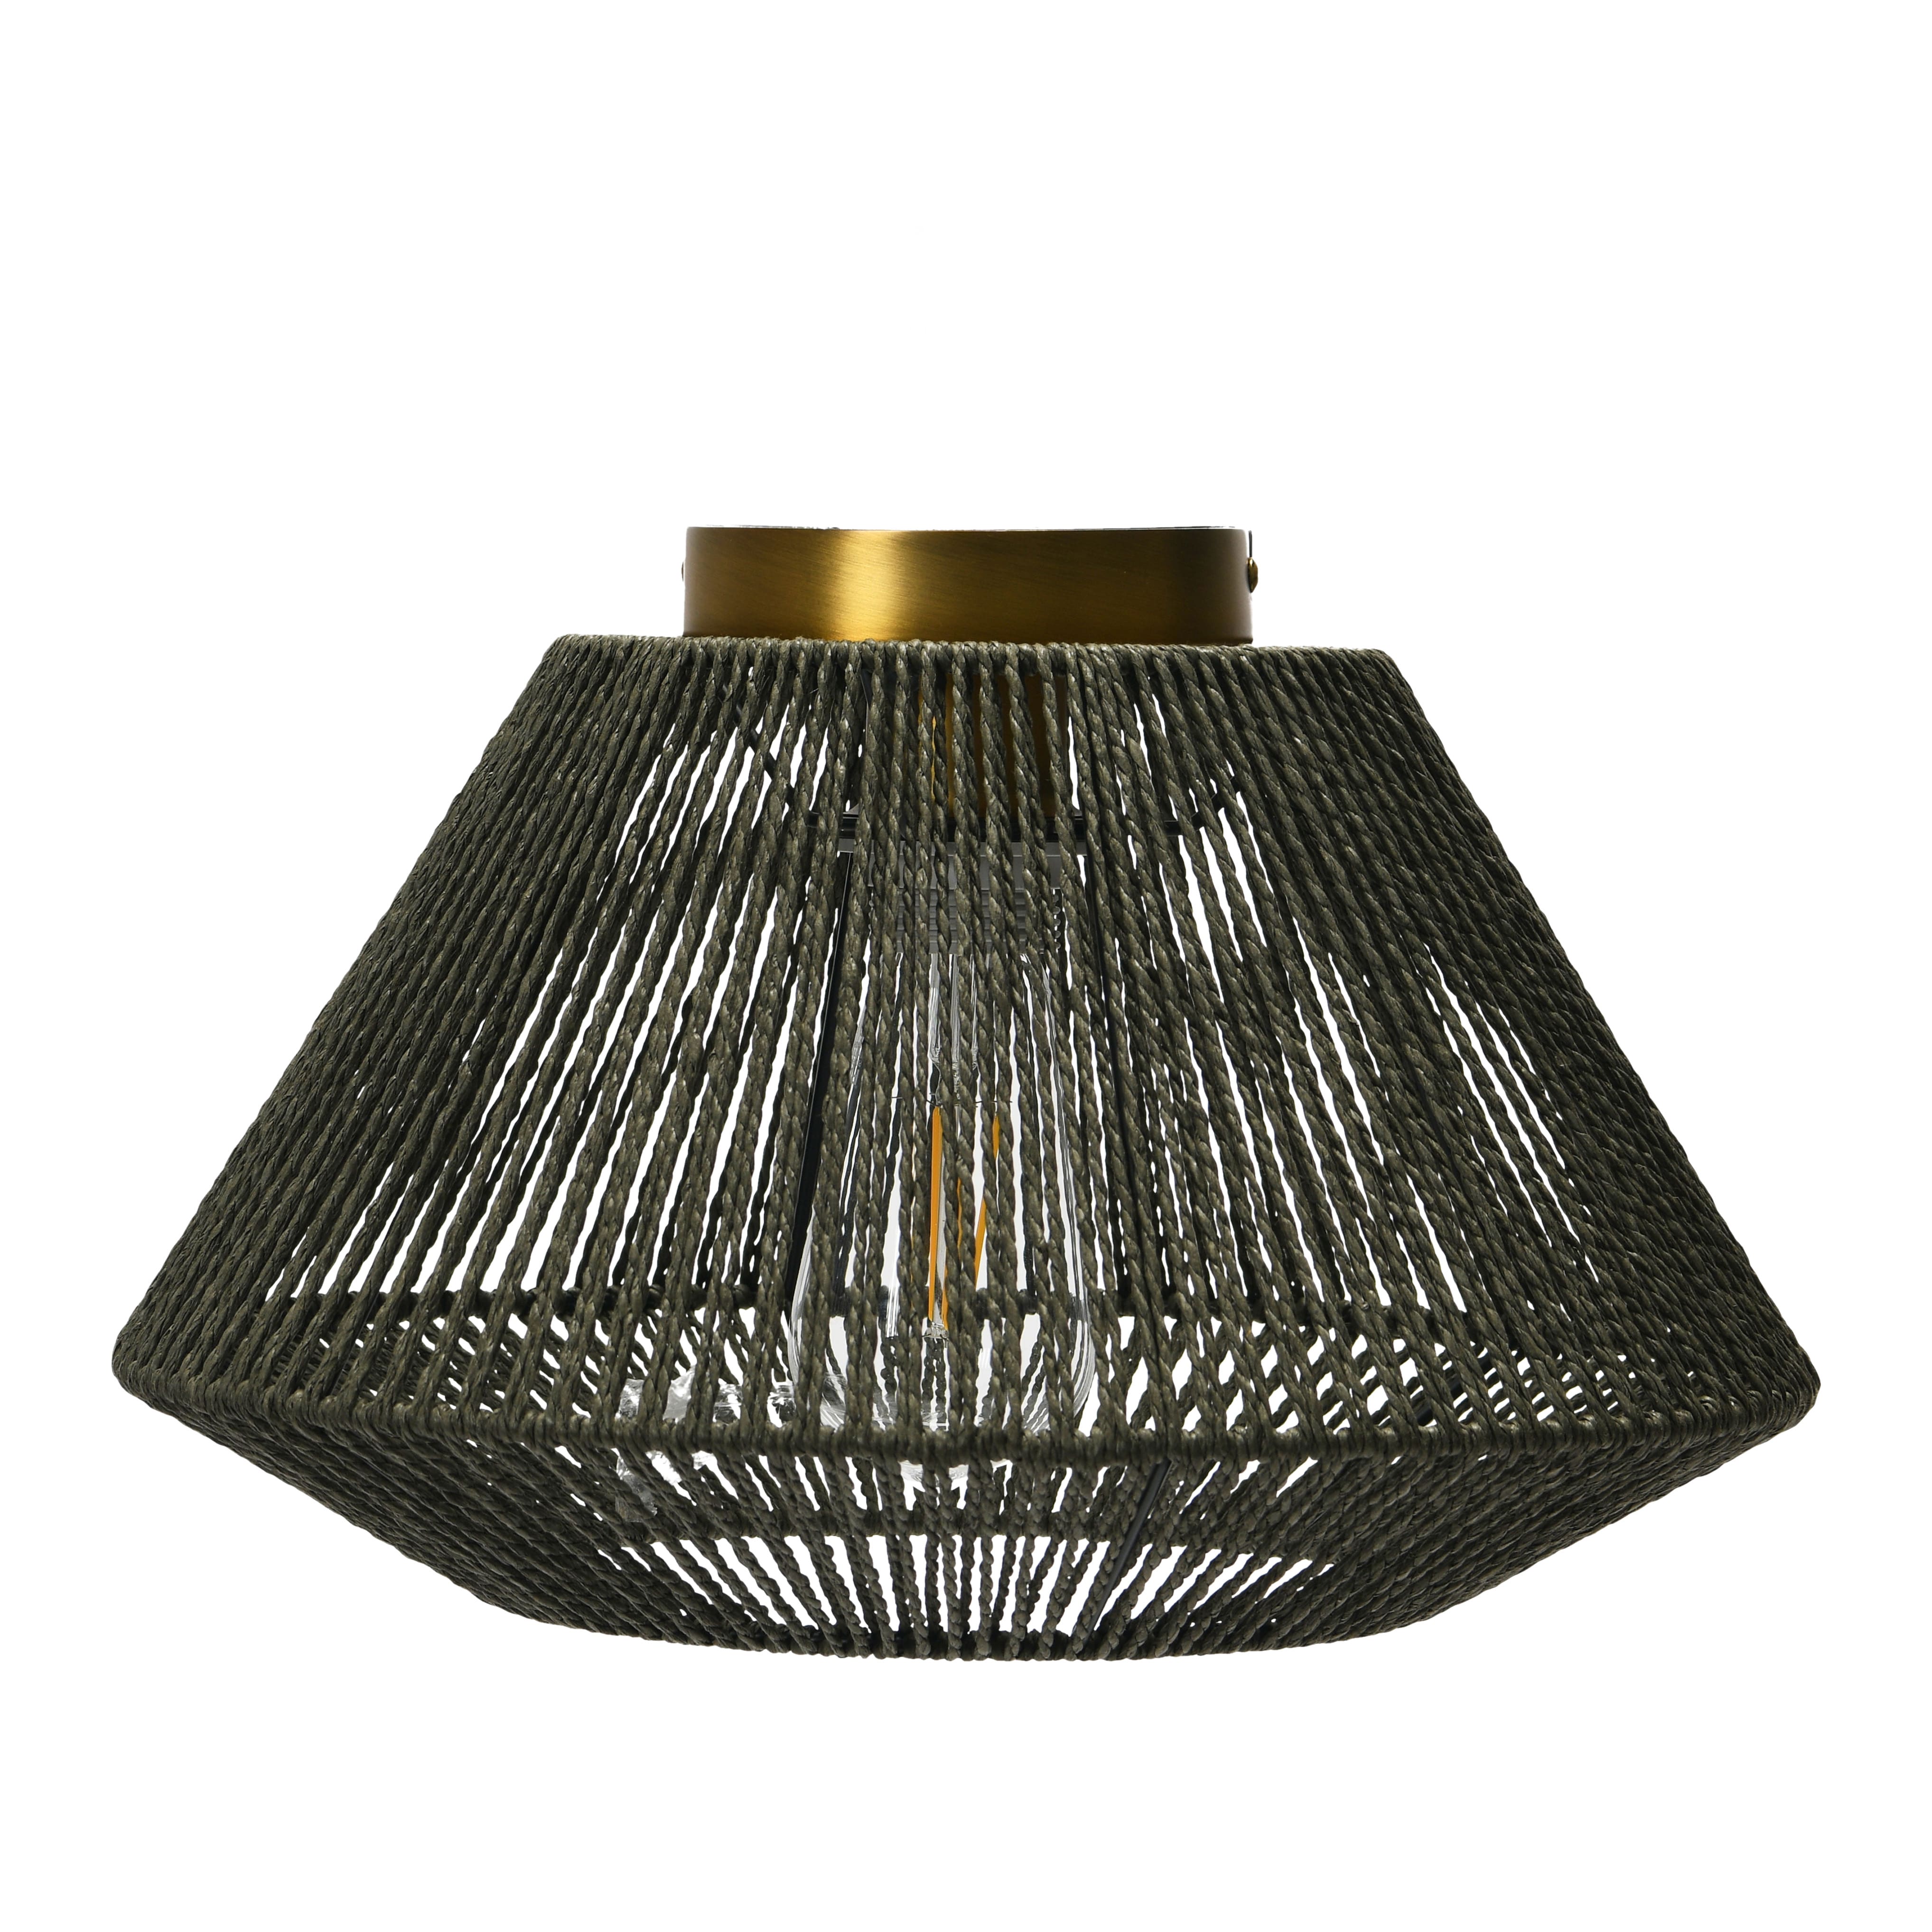 Gray Flush Mount Ceiling Light with Woven Paper Rope Shade